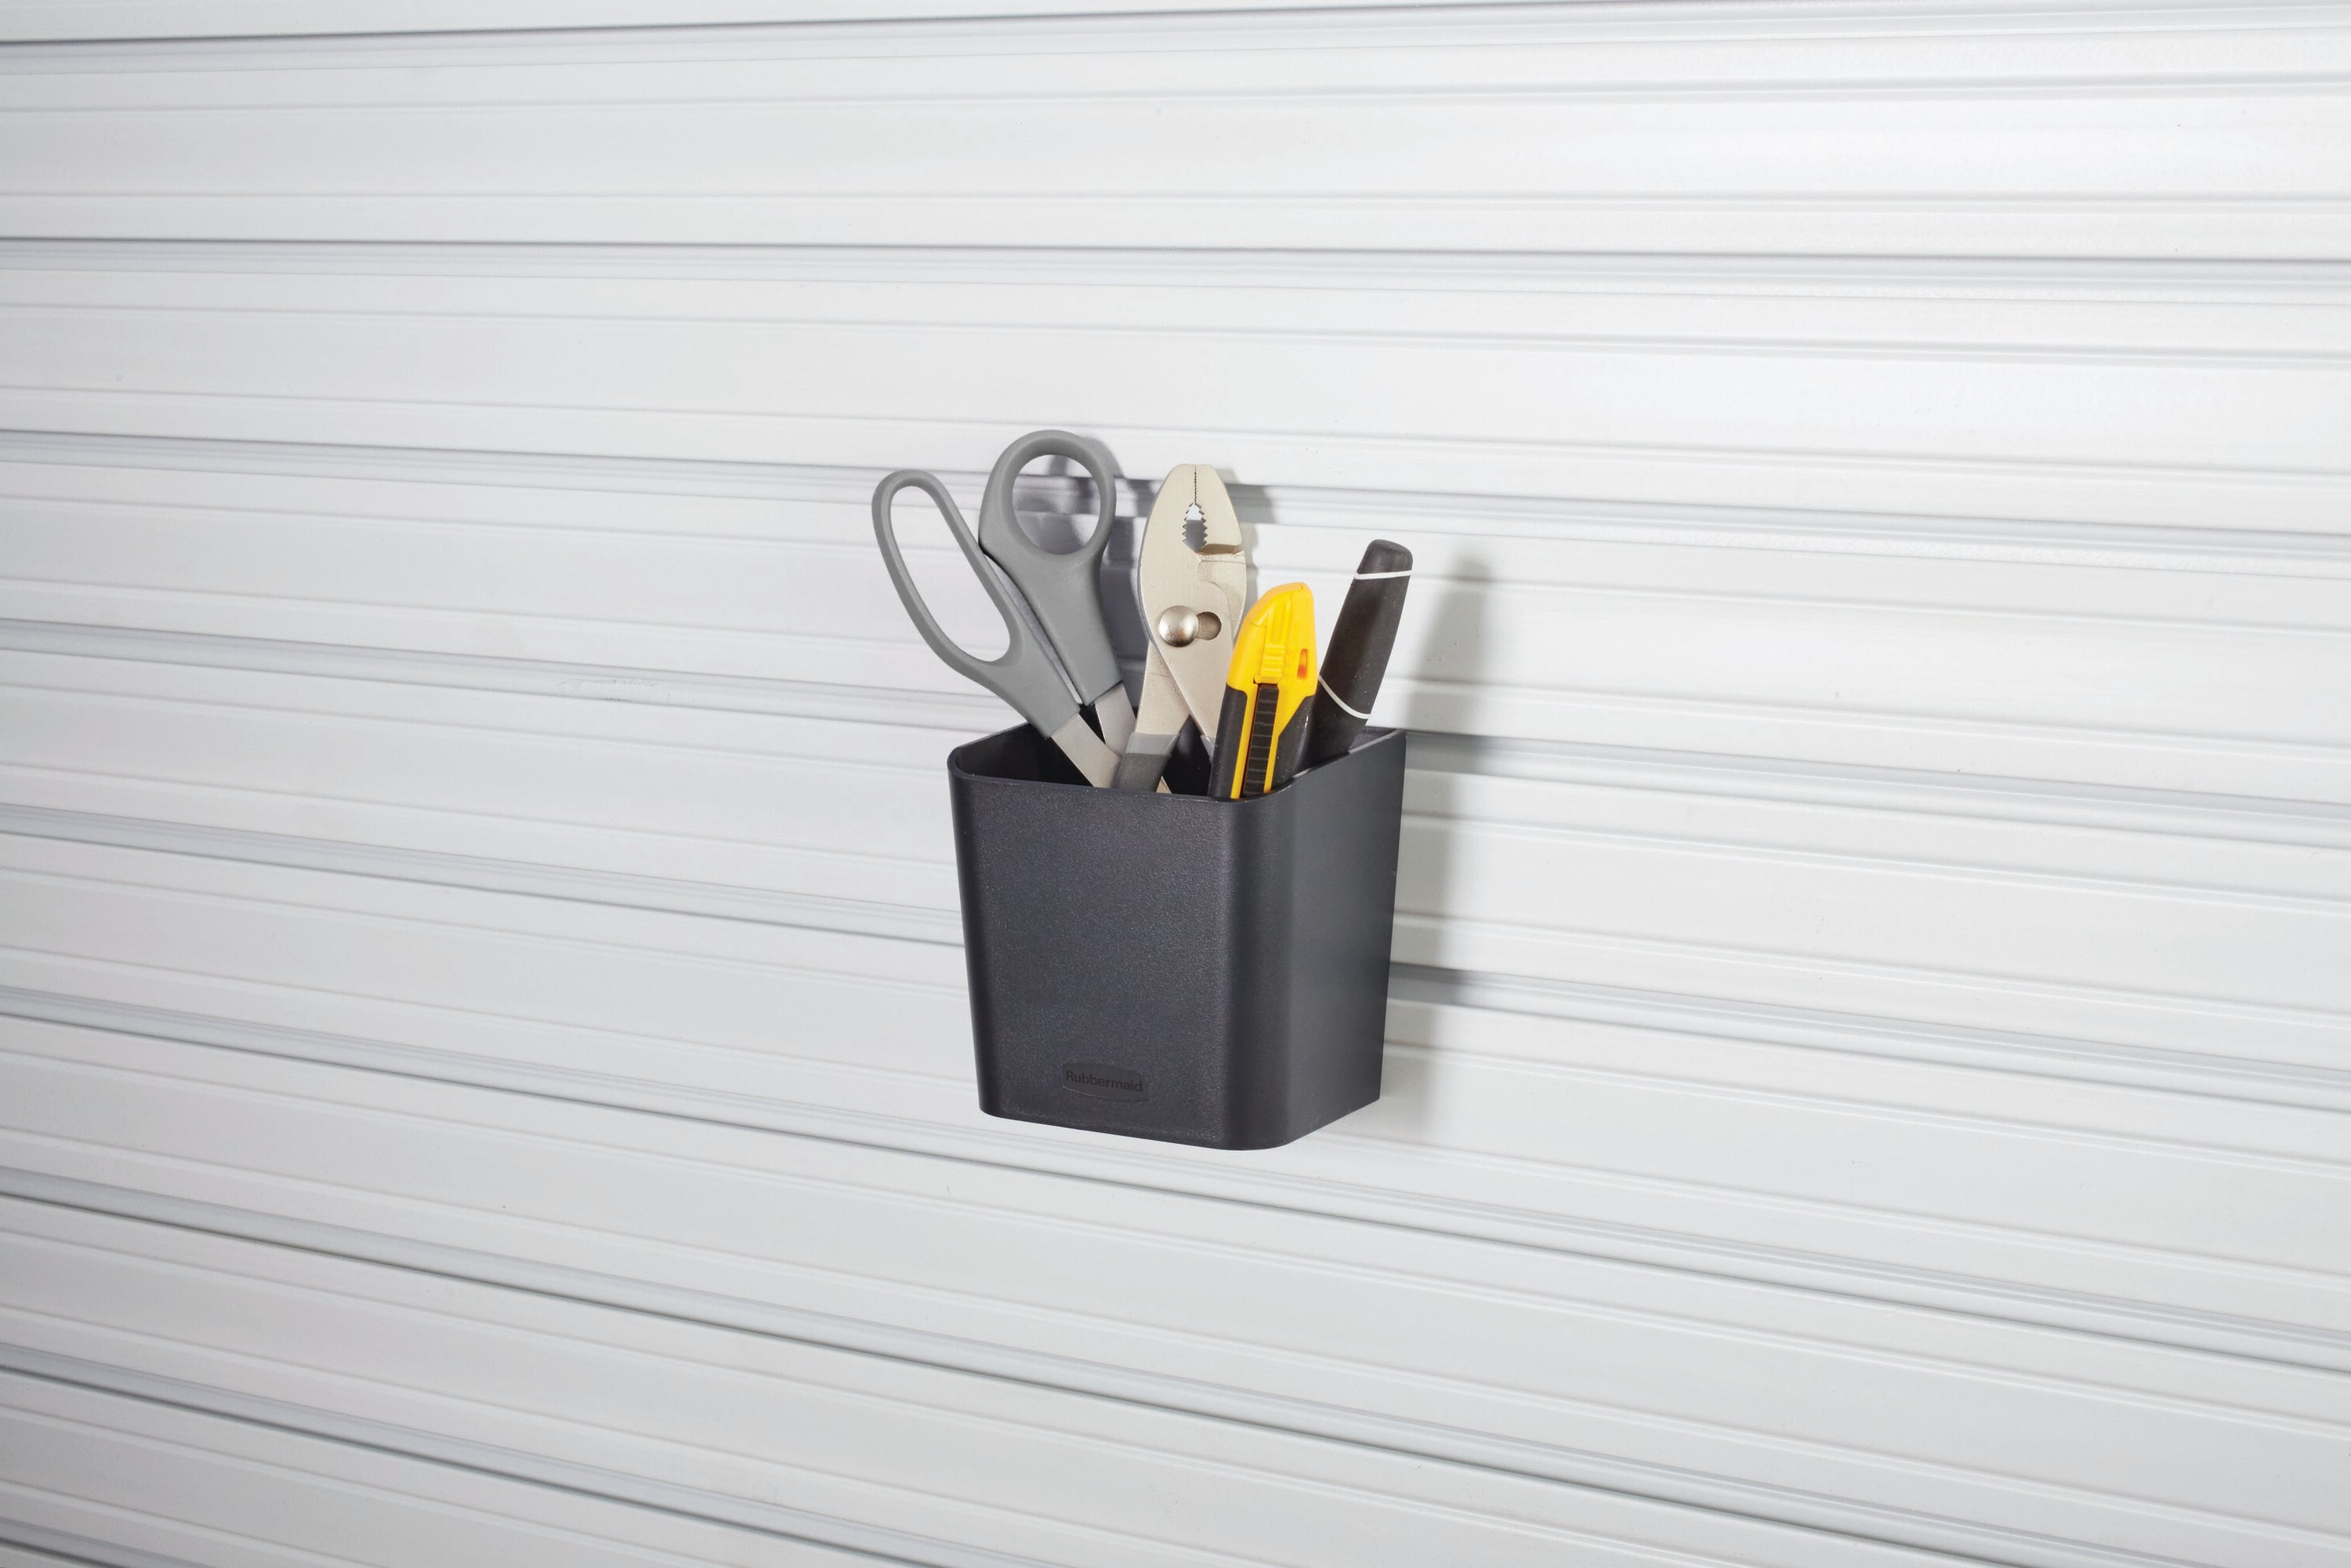 Rubbermaid FastTrack Garage Wall Storage Slat Panel System Cup